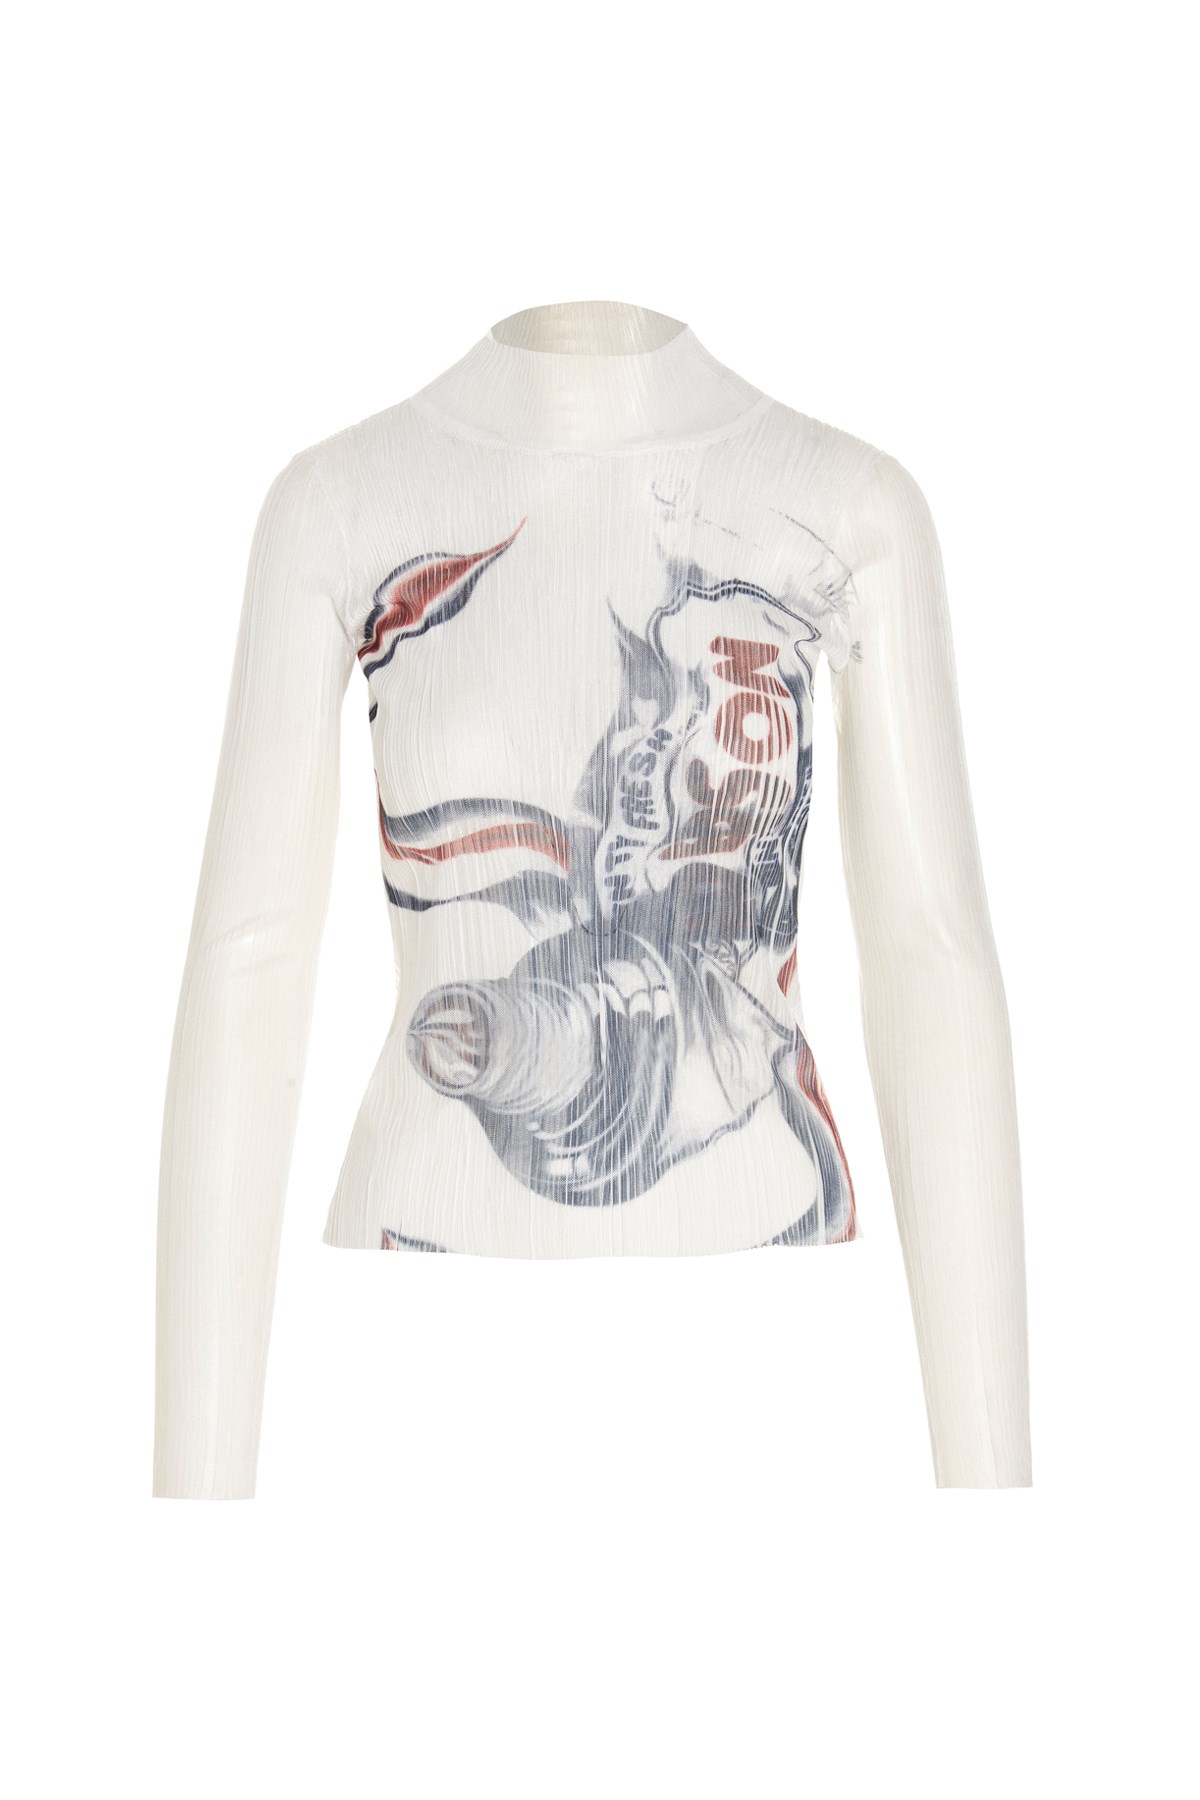 J.W.ANDERSON Printed Sweater